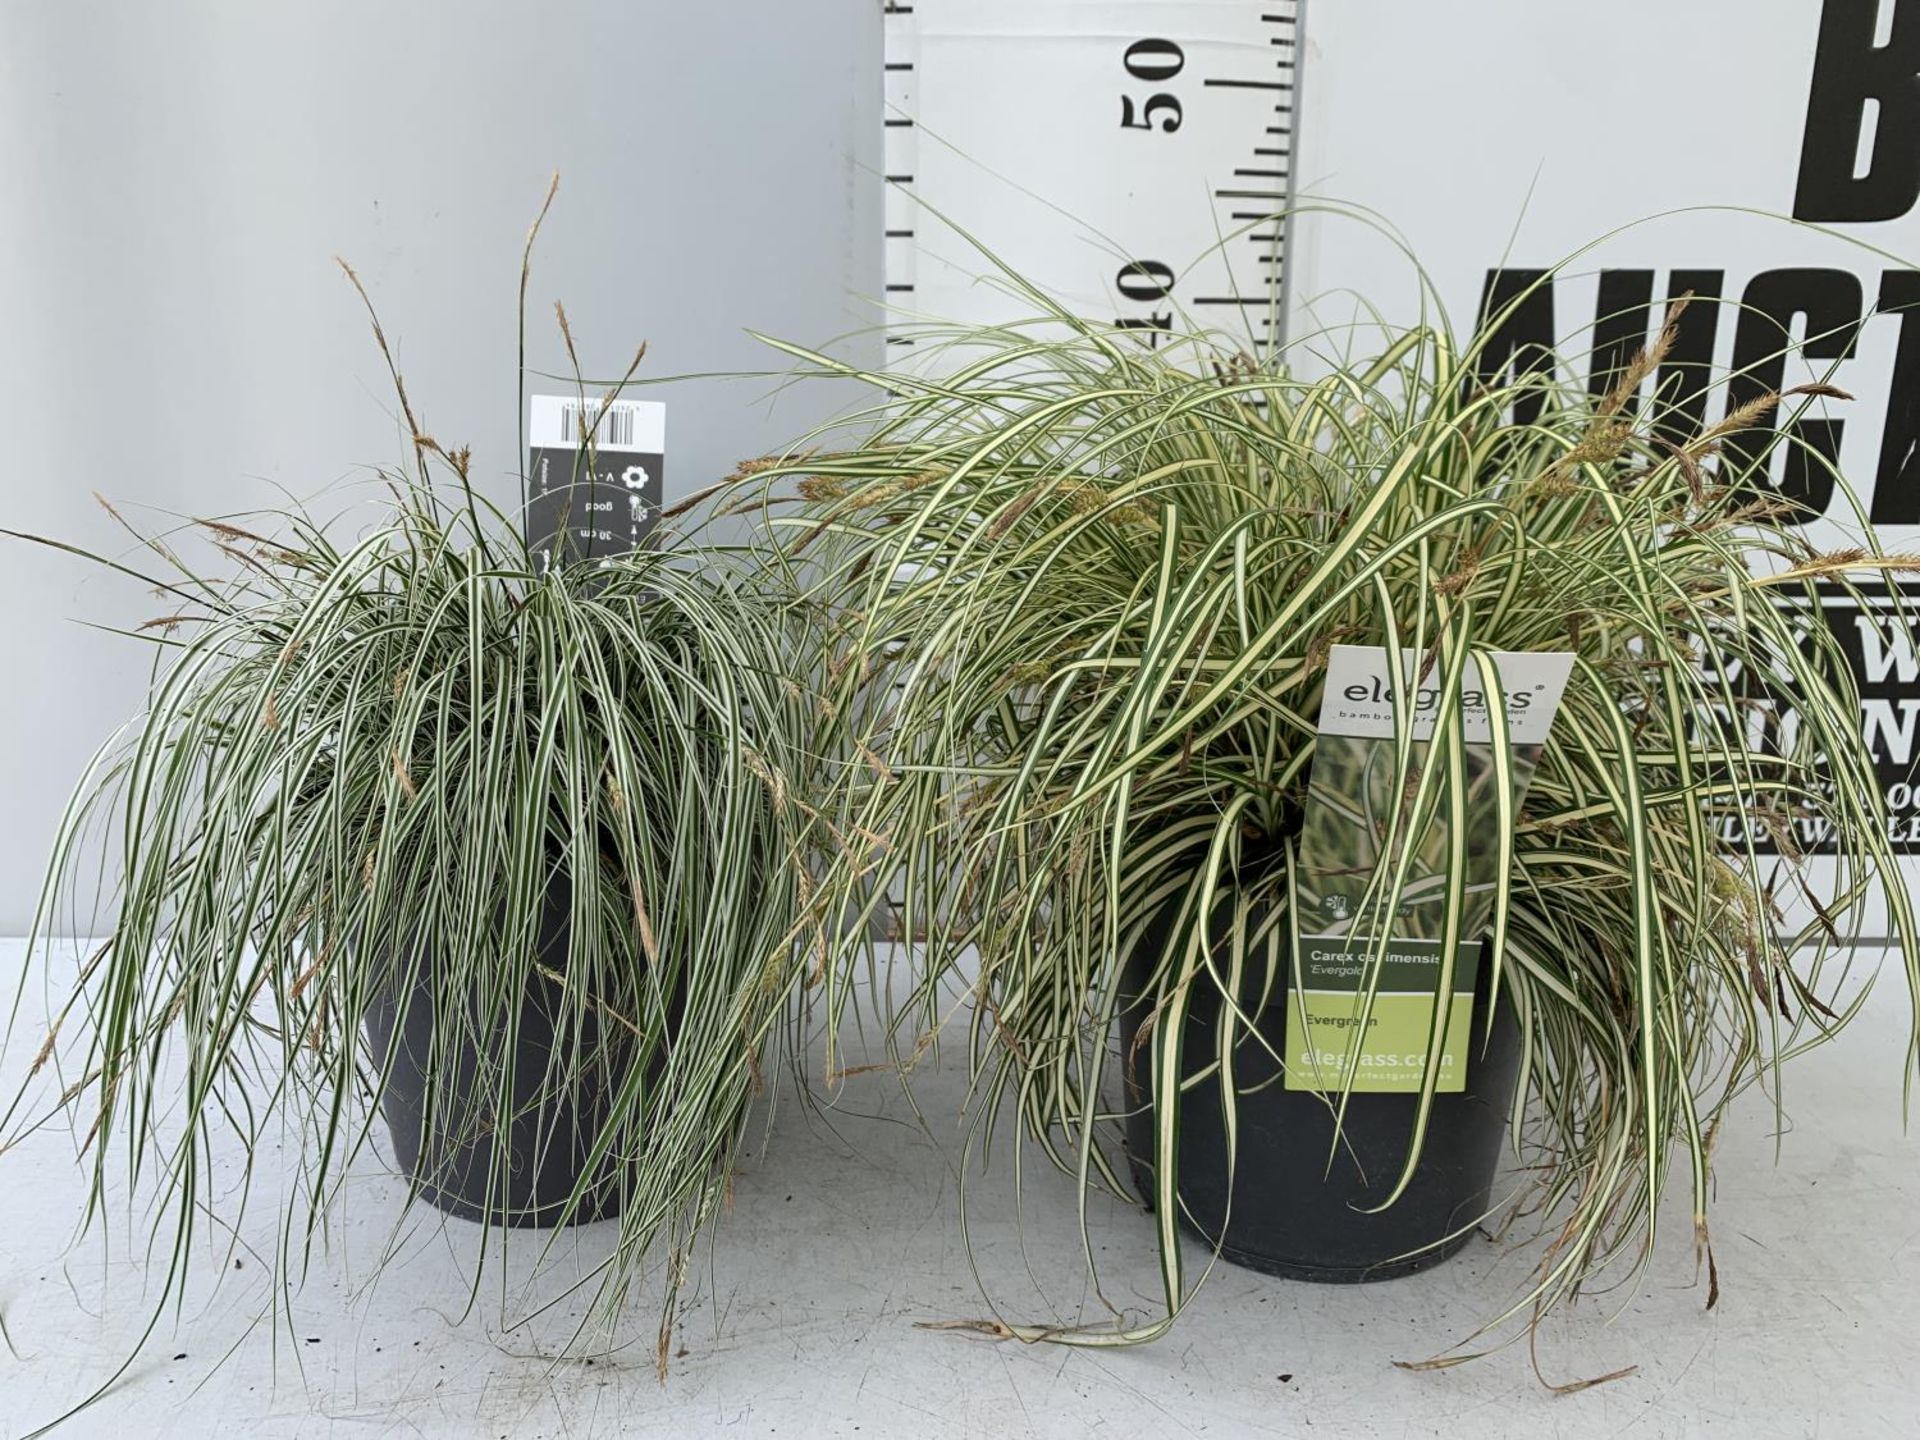 TWO HARDY ORNAMENTAL GRASSES CAREX 'EVERGOLD' AND 'EVEREST' IN 3 LTR POTS APPROX 40CM IN HEIGHT PLUS